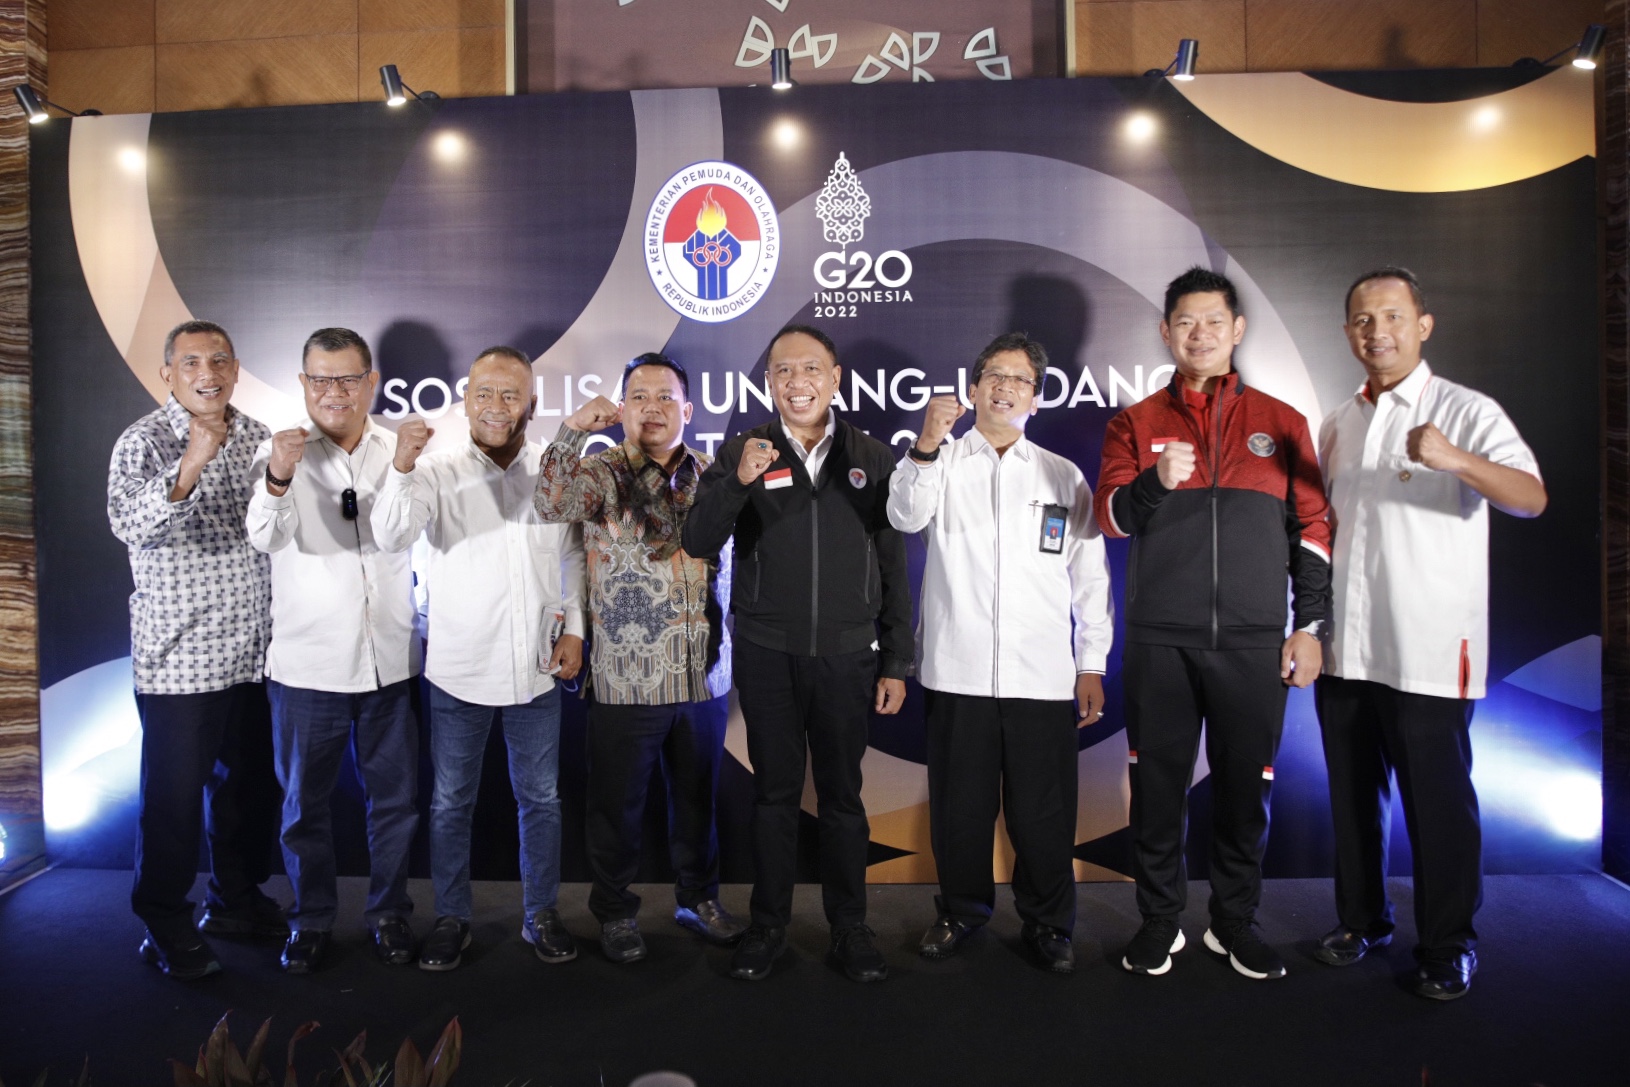 Indonesia Olympic Commitee - Ministry of Youth and Sports kicks off Sports Law socialization